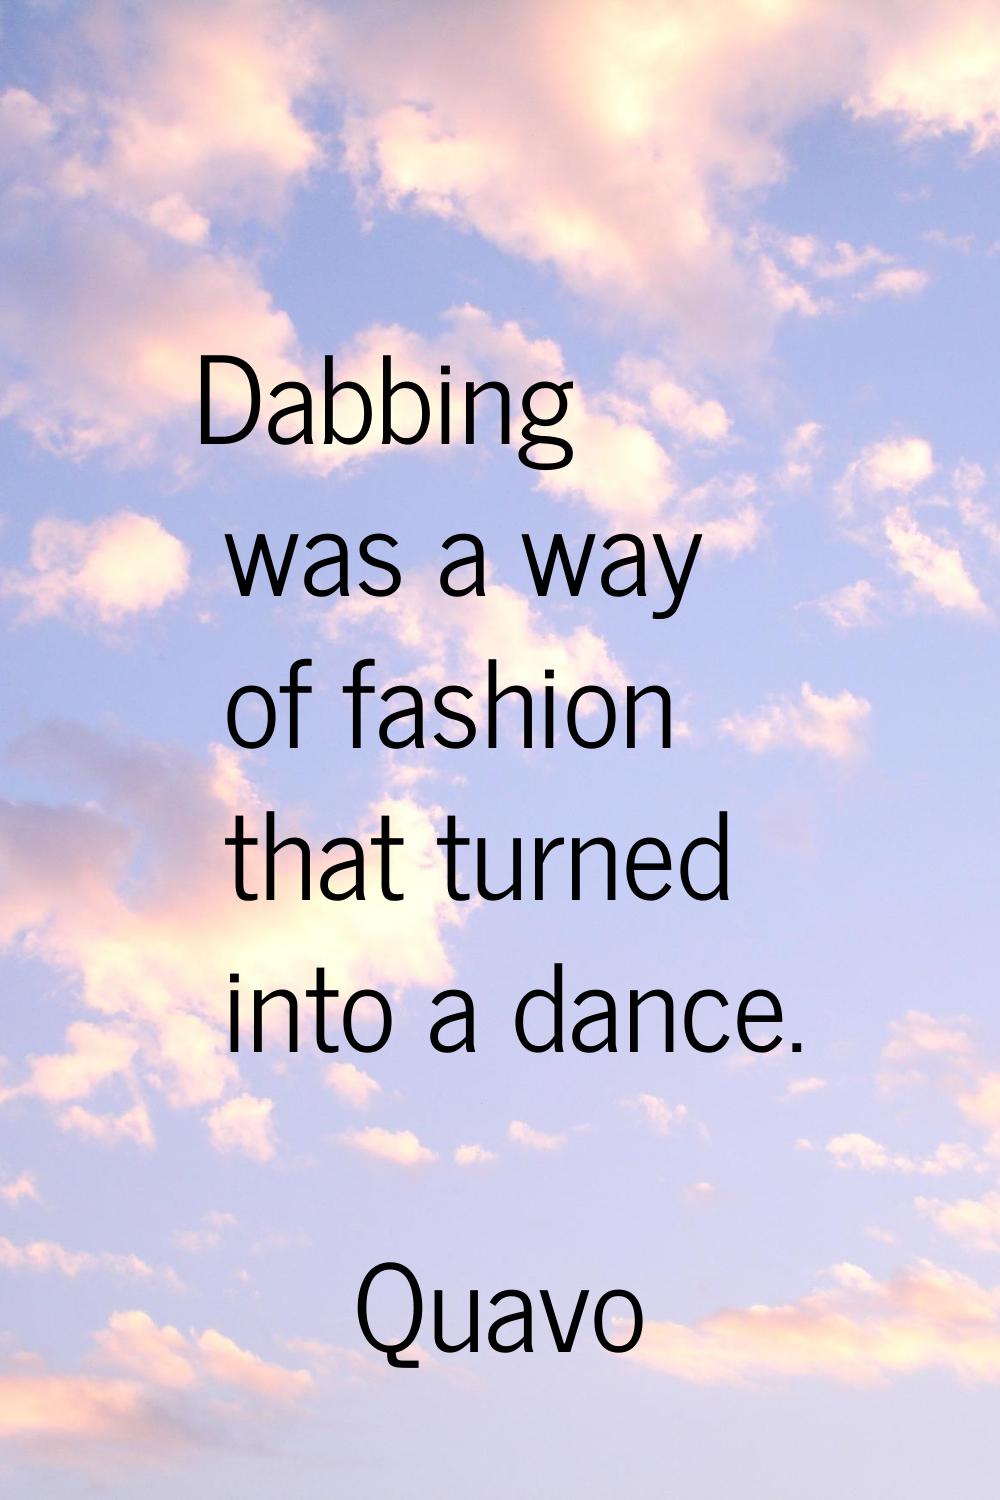 Dabbing was a way of fashion that turned into a dance.